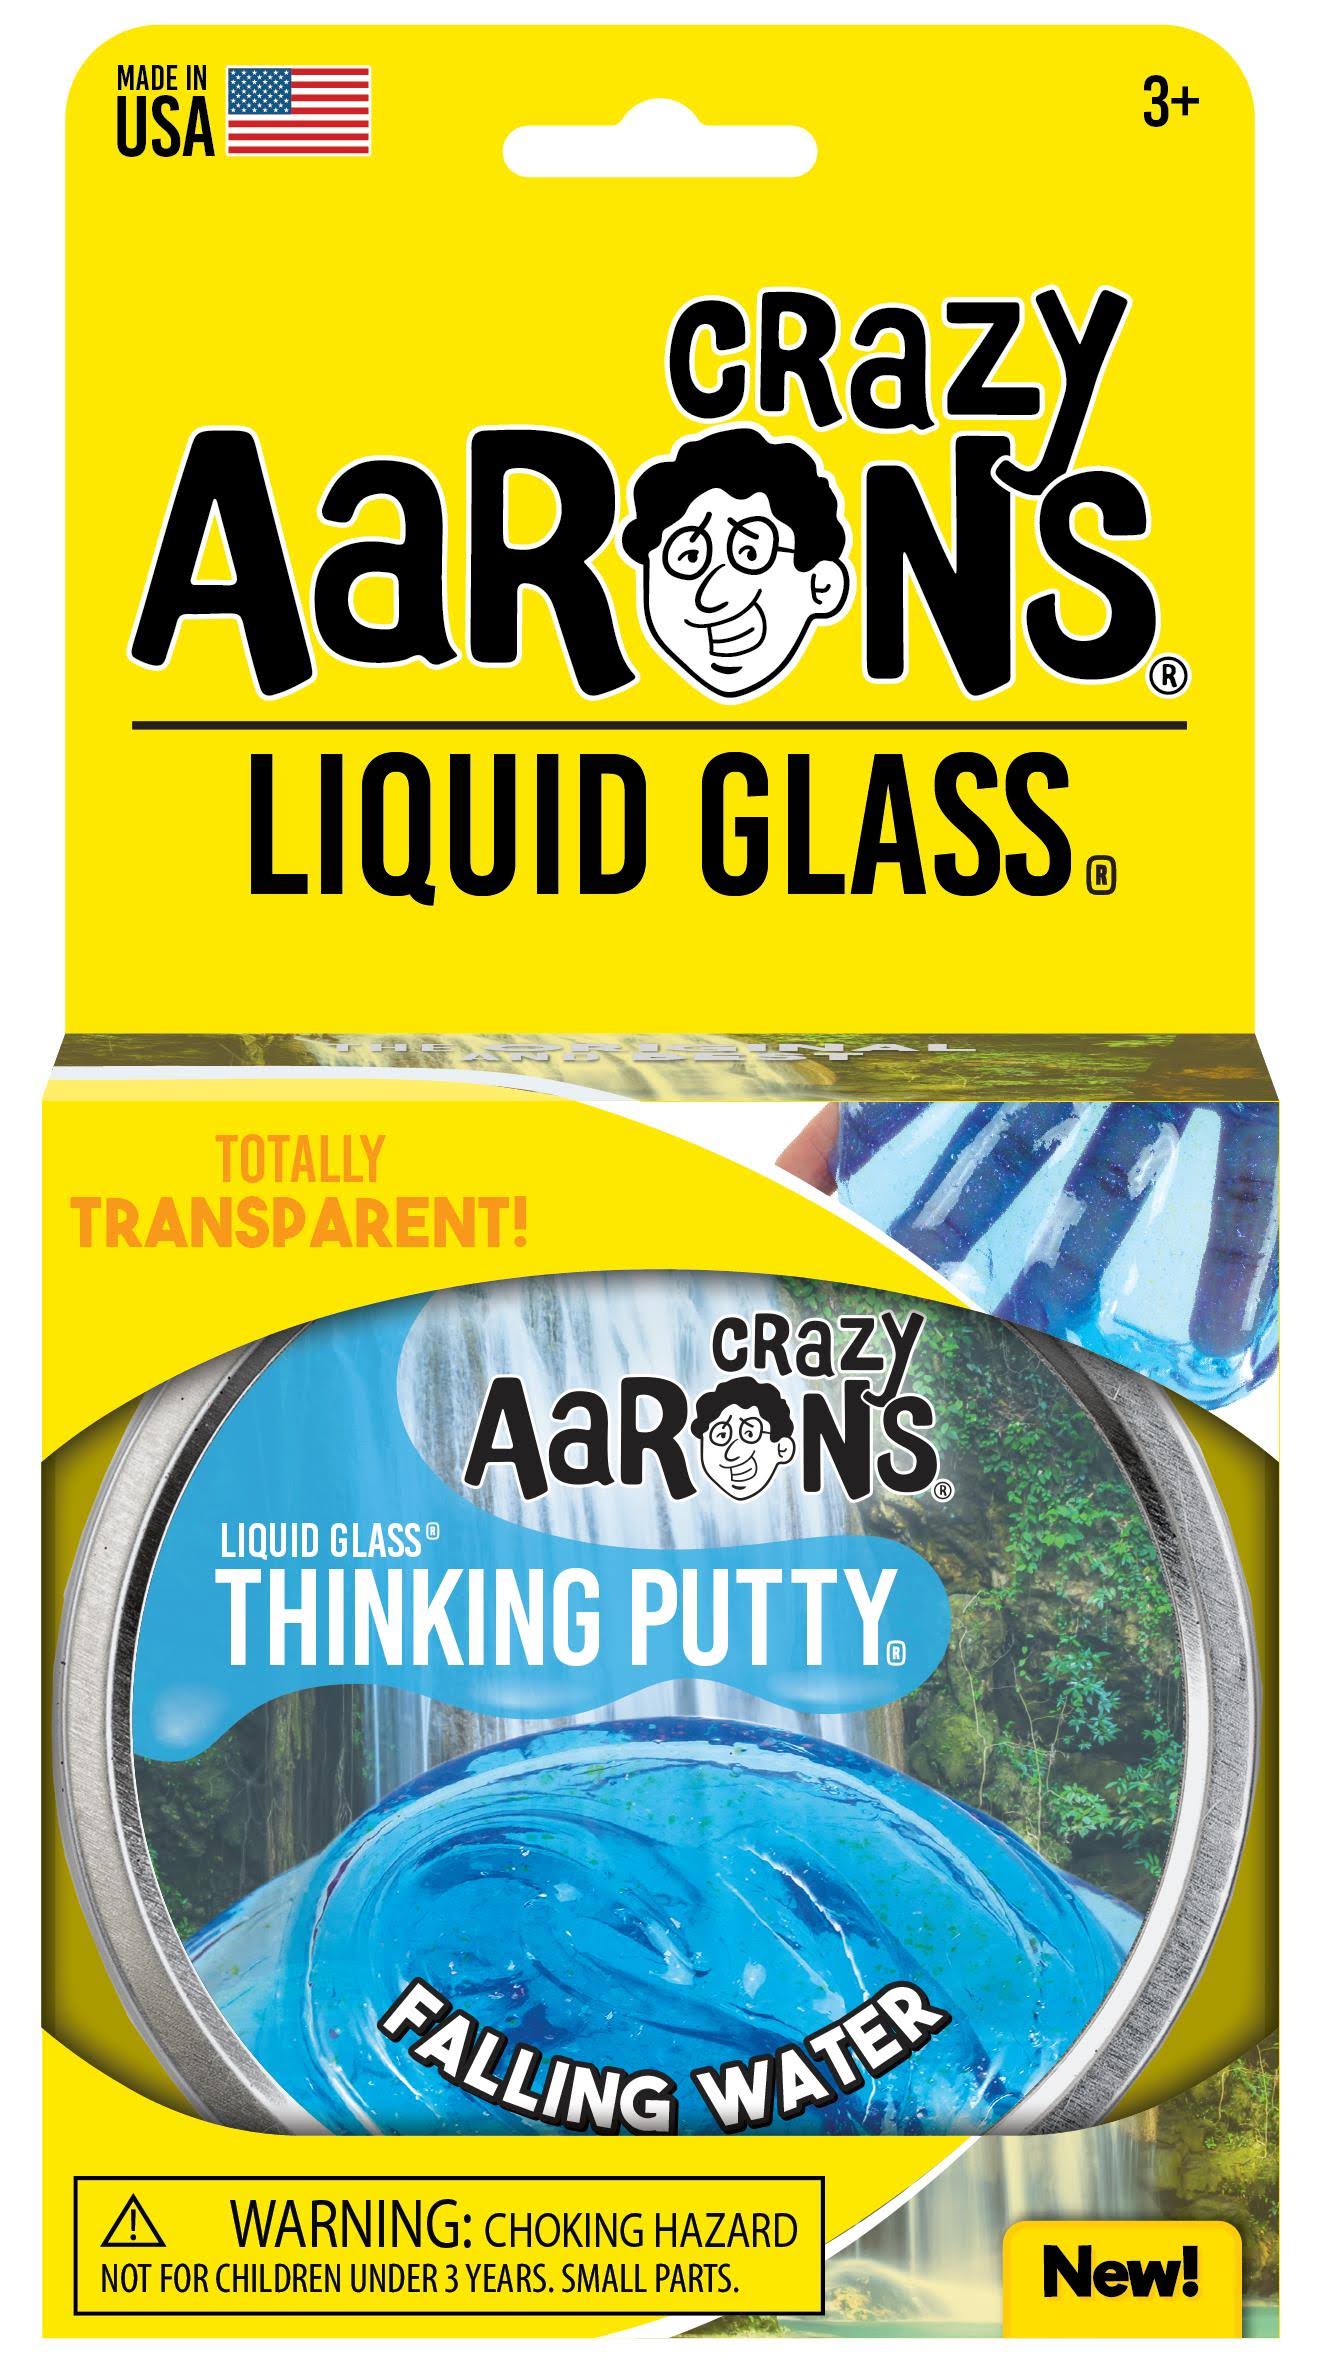 Crazy Aarons Liquid Glass Thinking Putty Falling Water